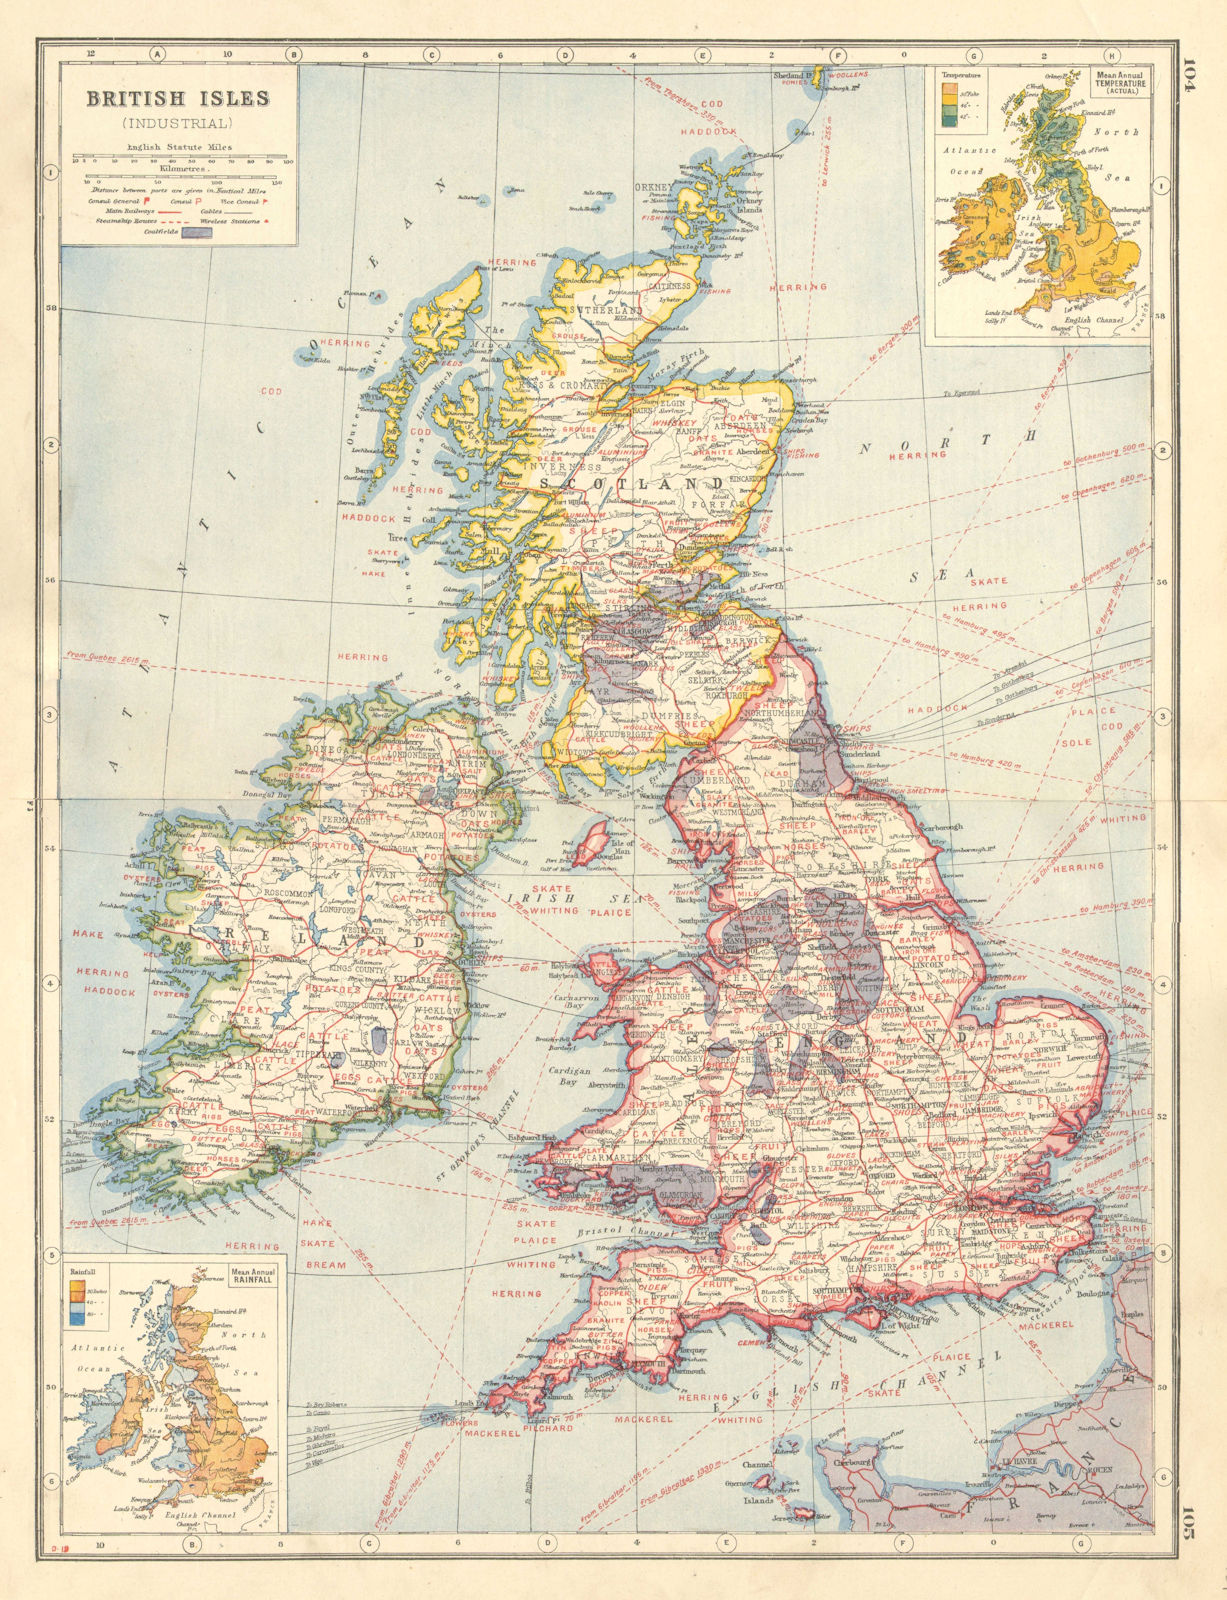 BRITISH ISLES AGRICULTURAL/INDUSTRIAL. Showing key products coalfields 1920 map